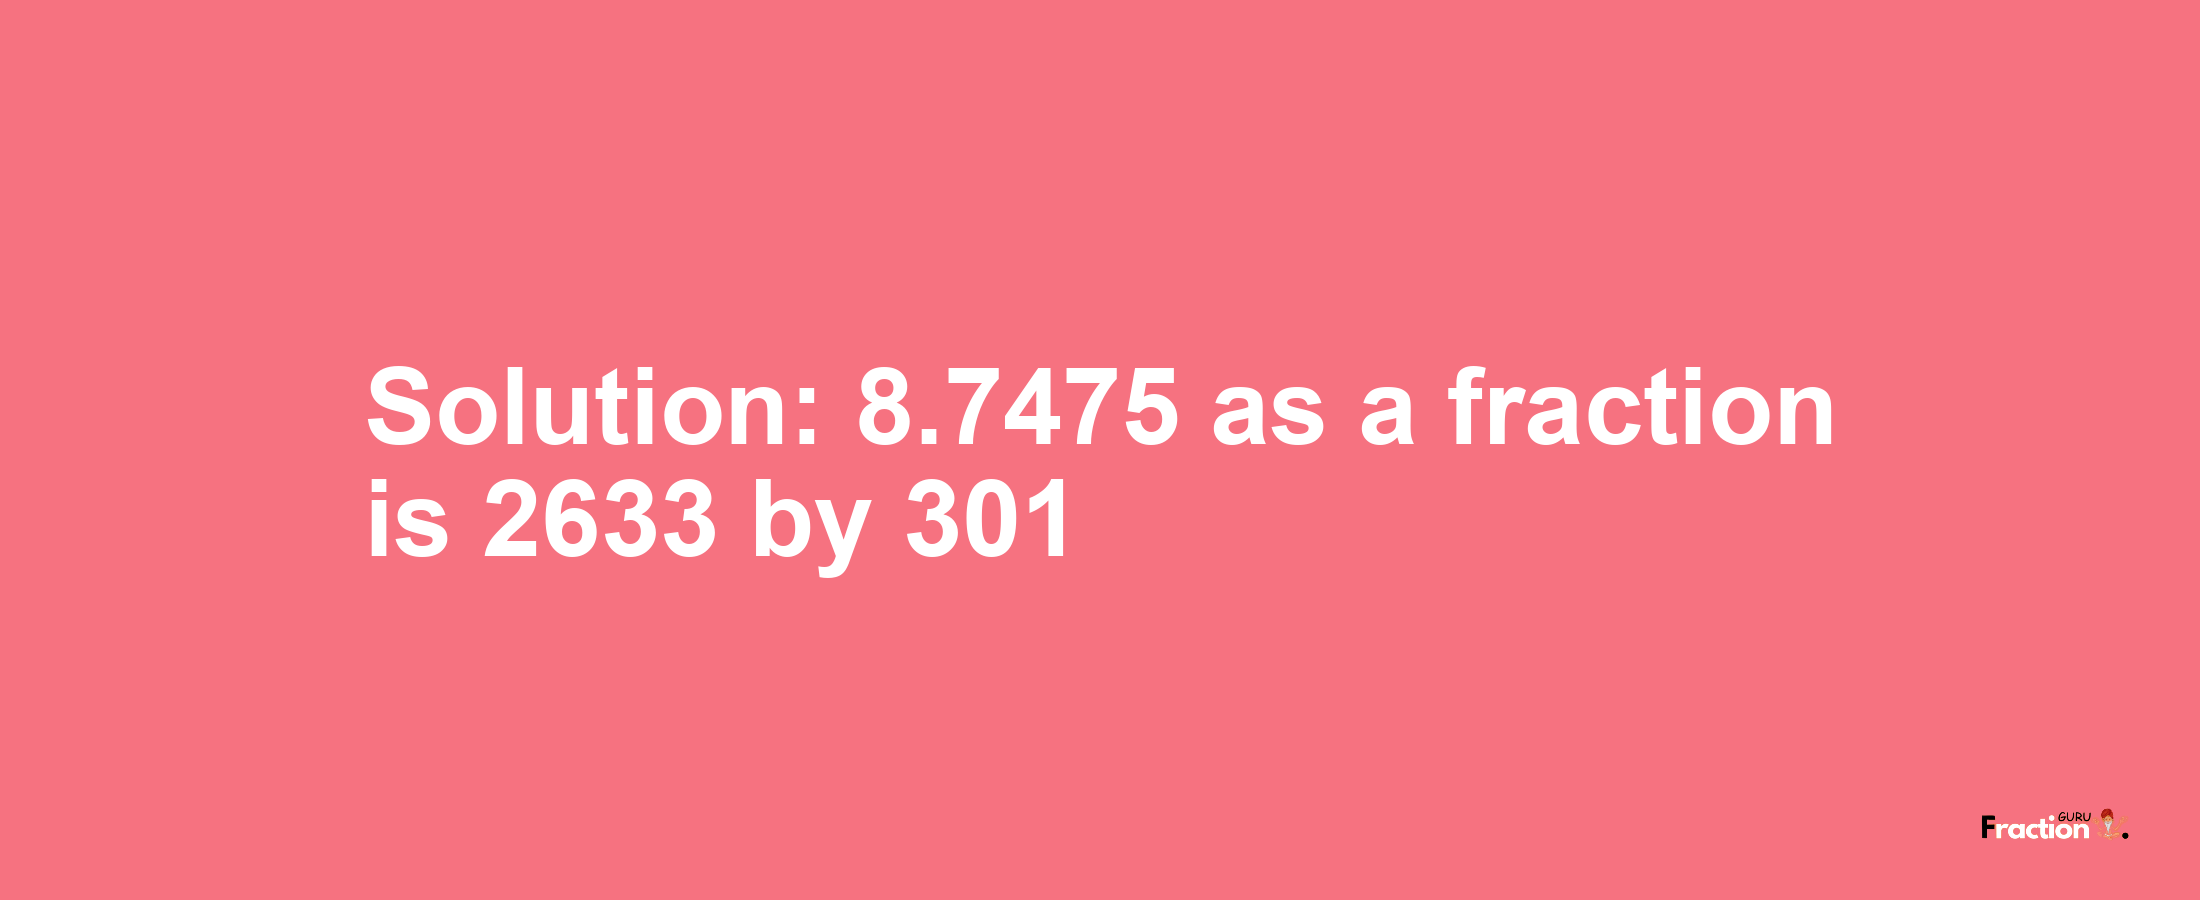 Solution:8.7475 as a fraction is 2633/301